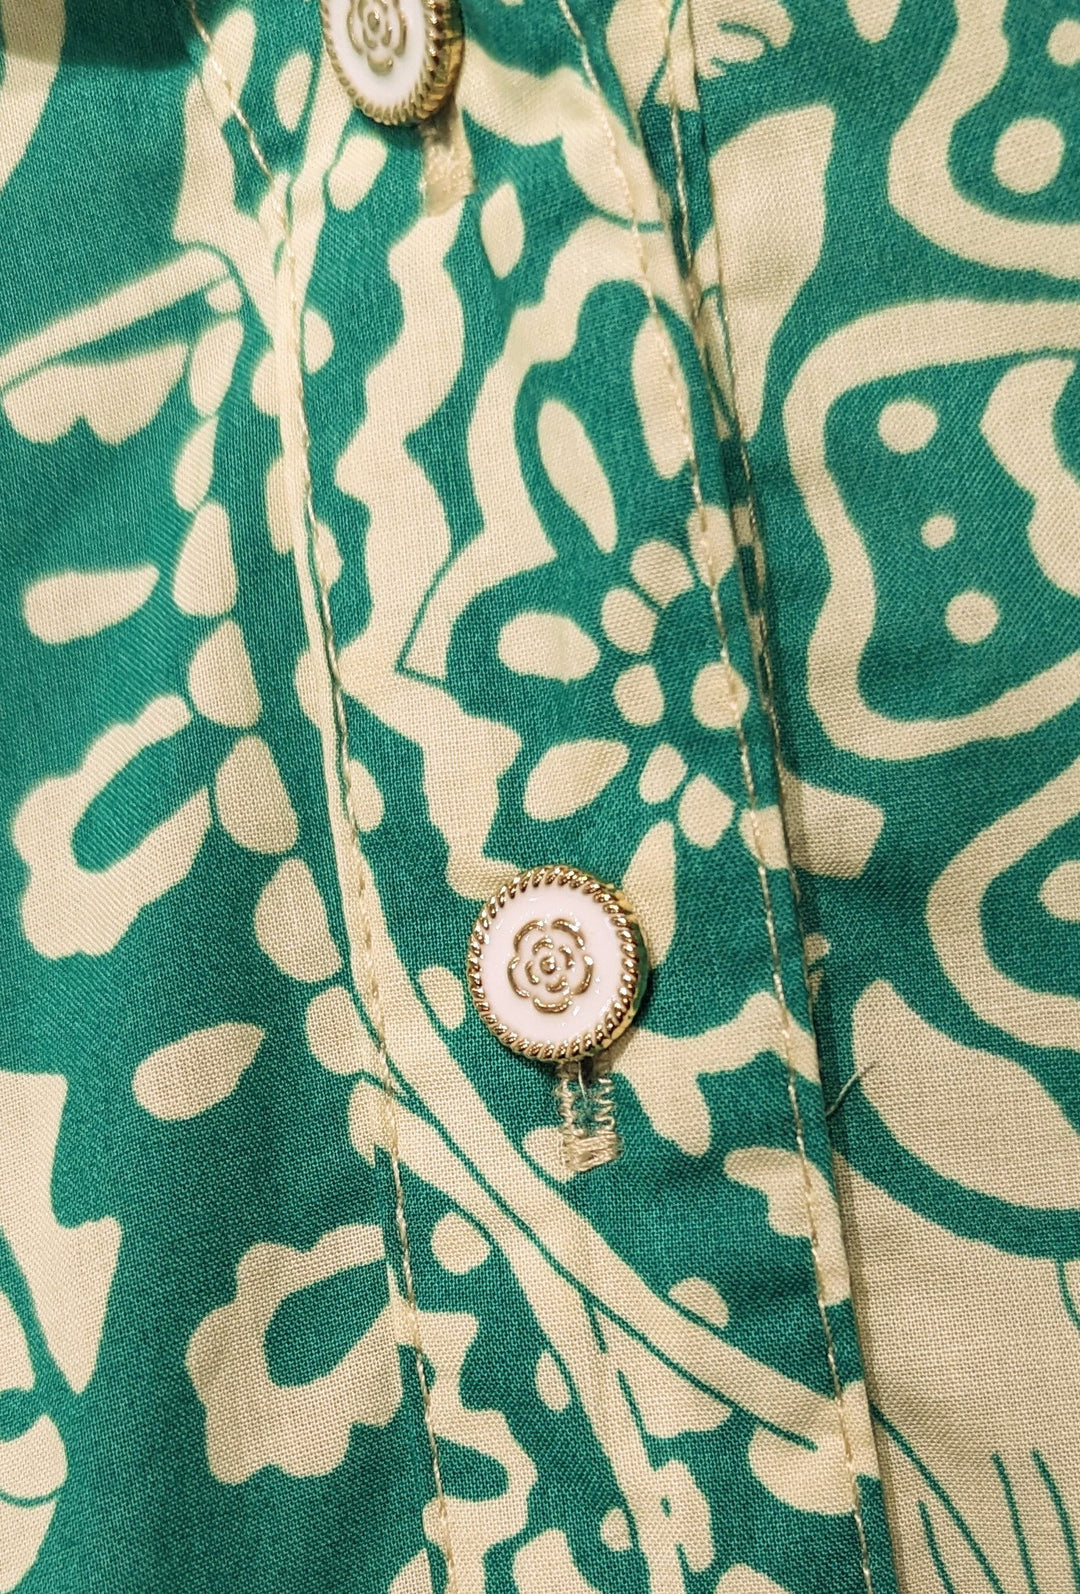 a close up of the pretty buttons on the floral shift dress